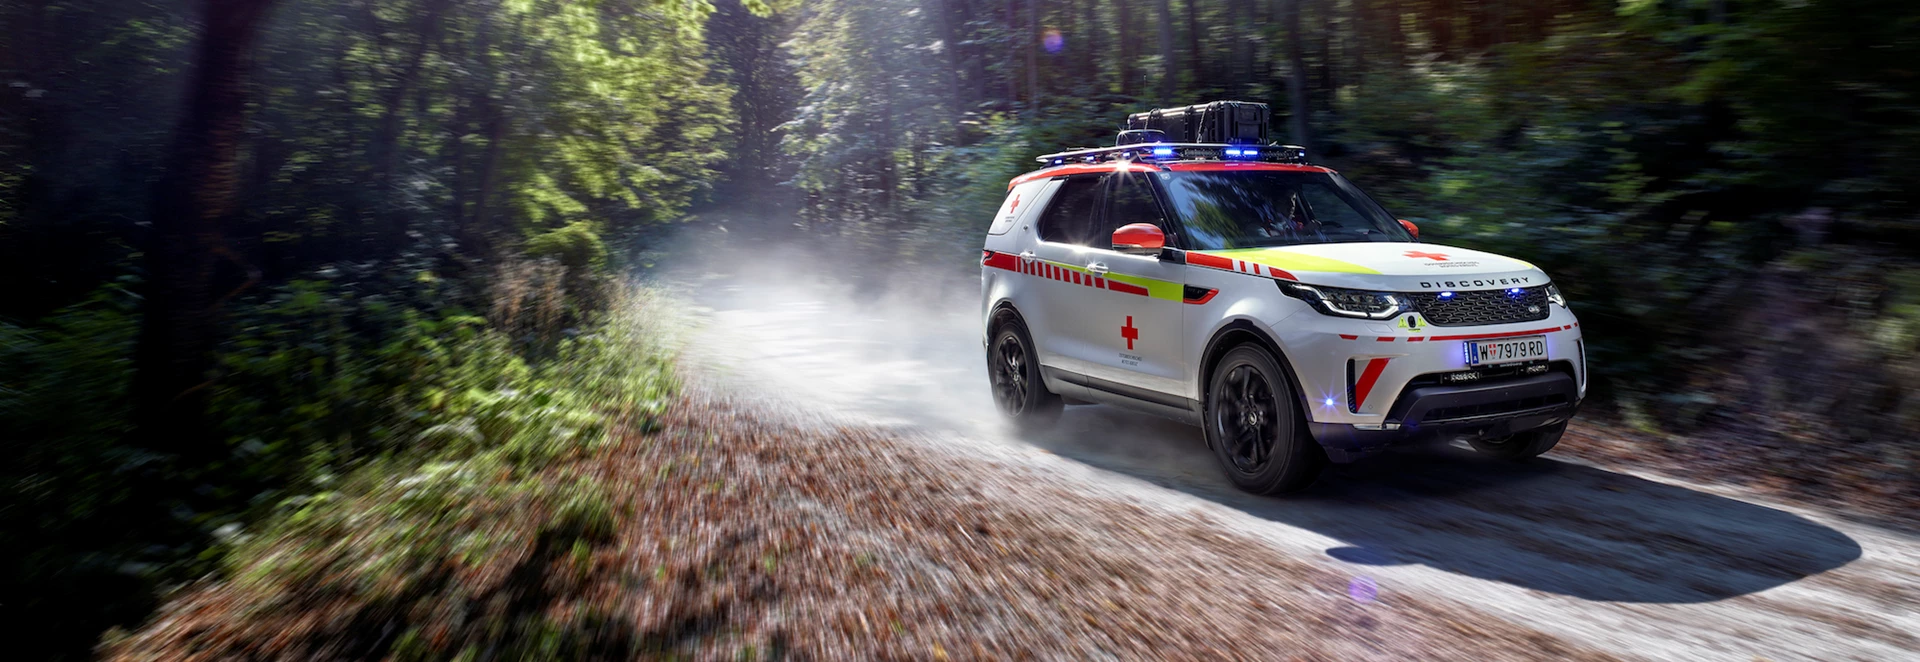 Land Rover Discovery added to Red Cross Emergency Fleet